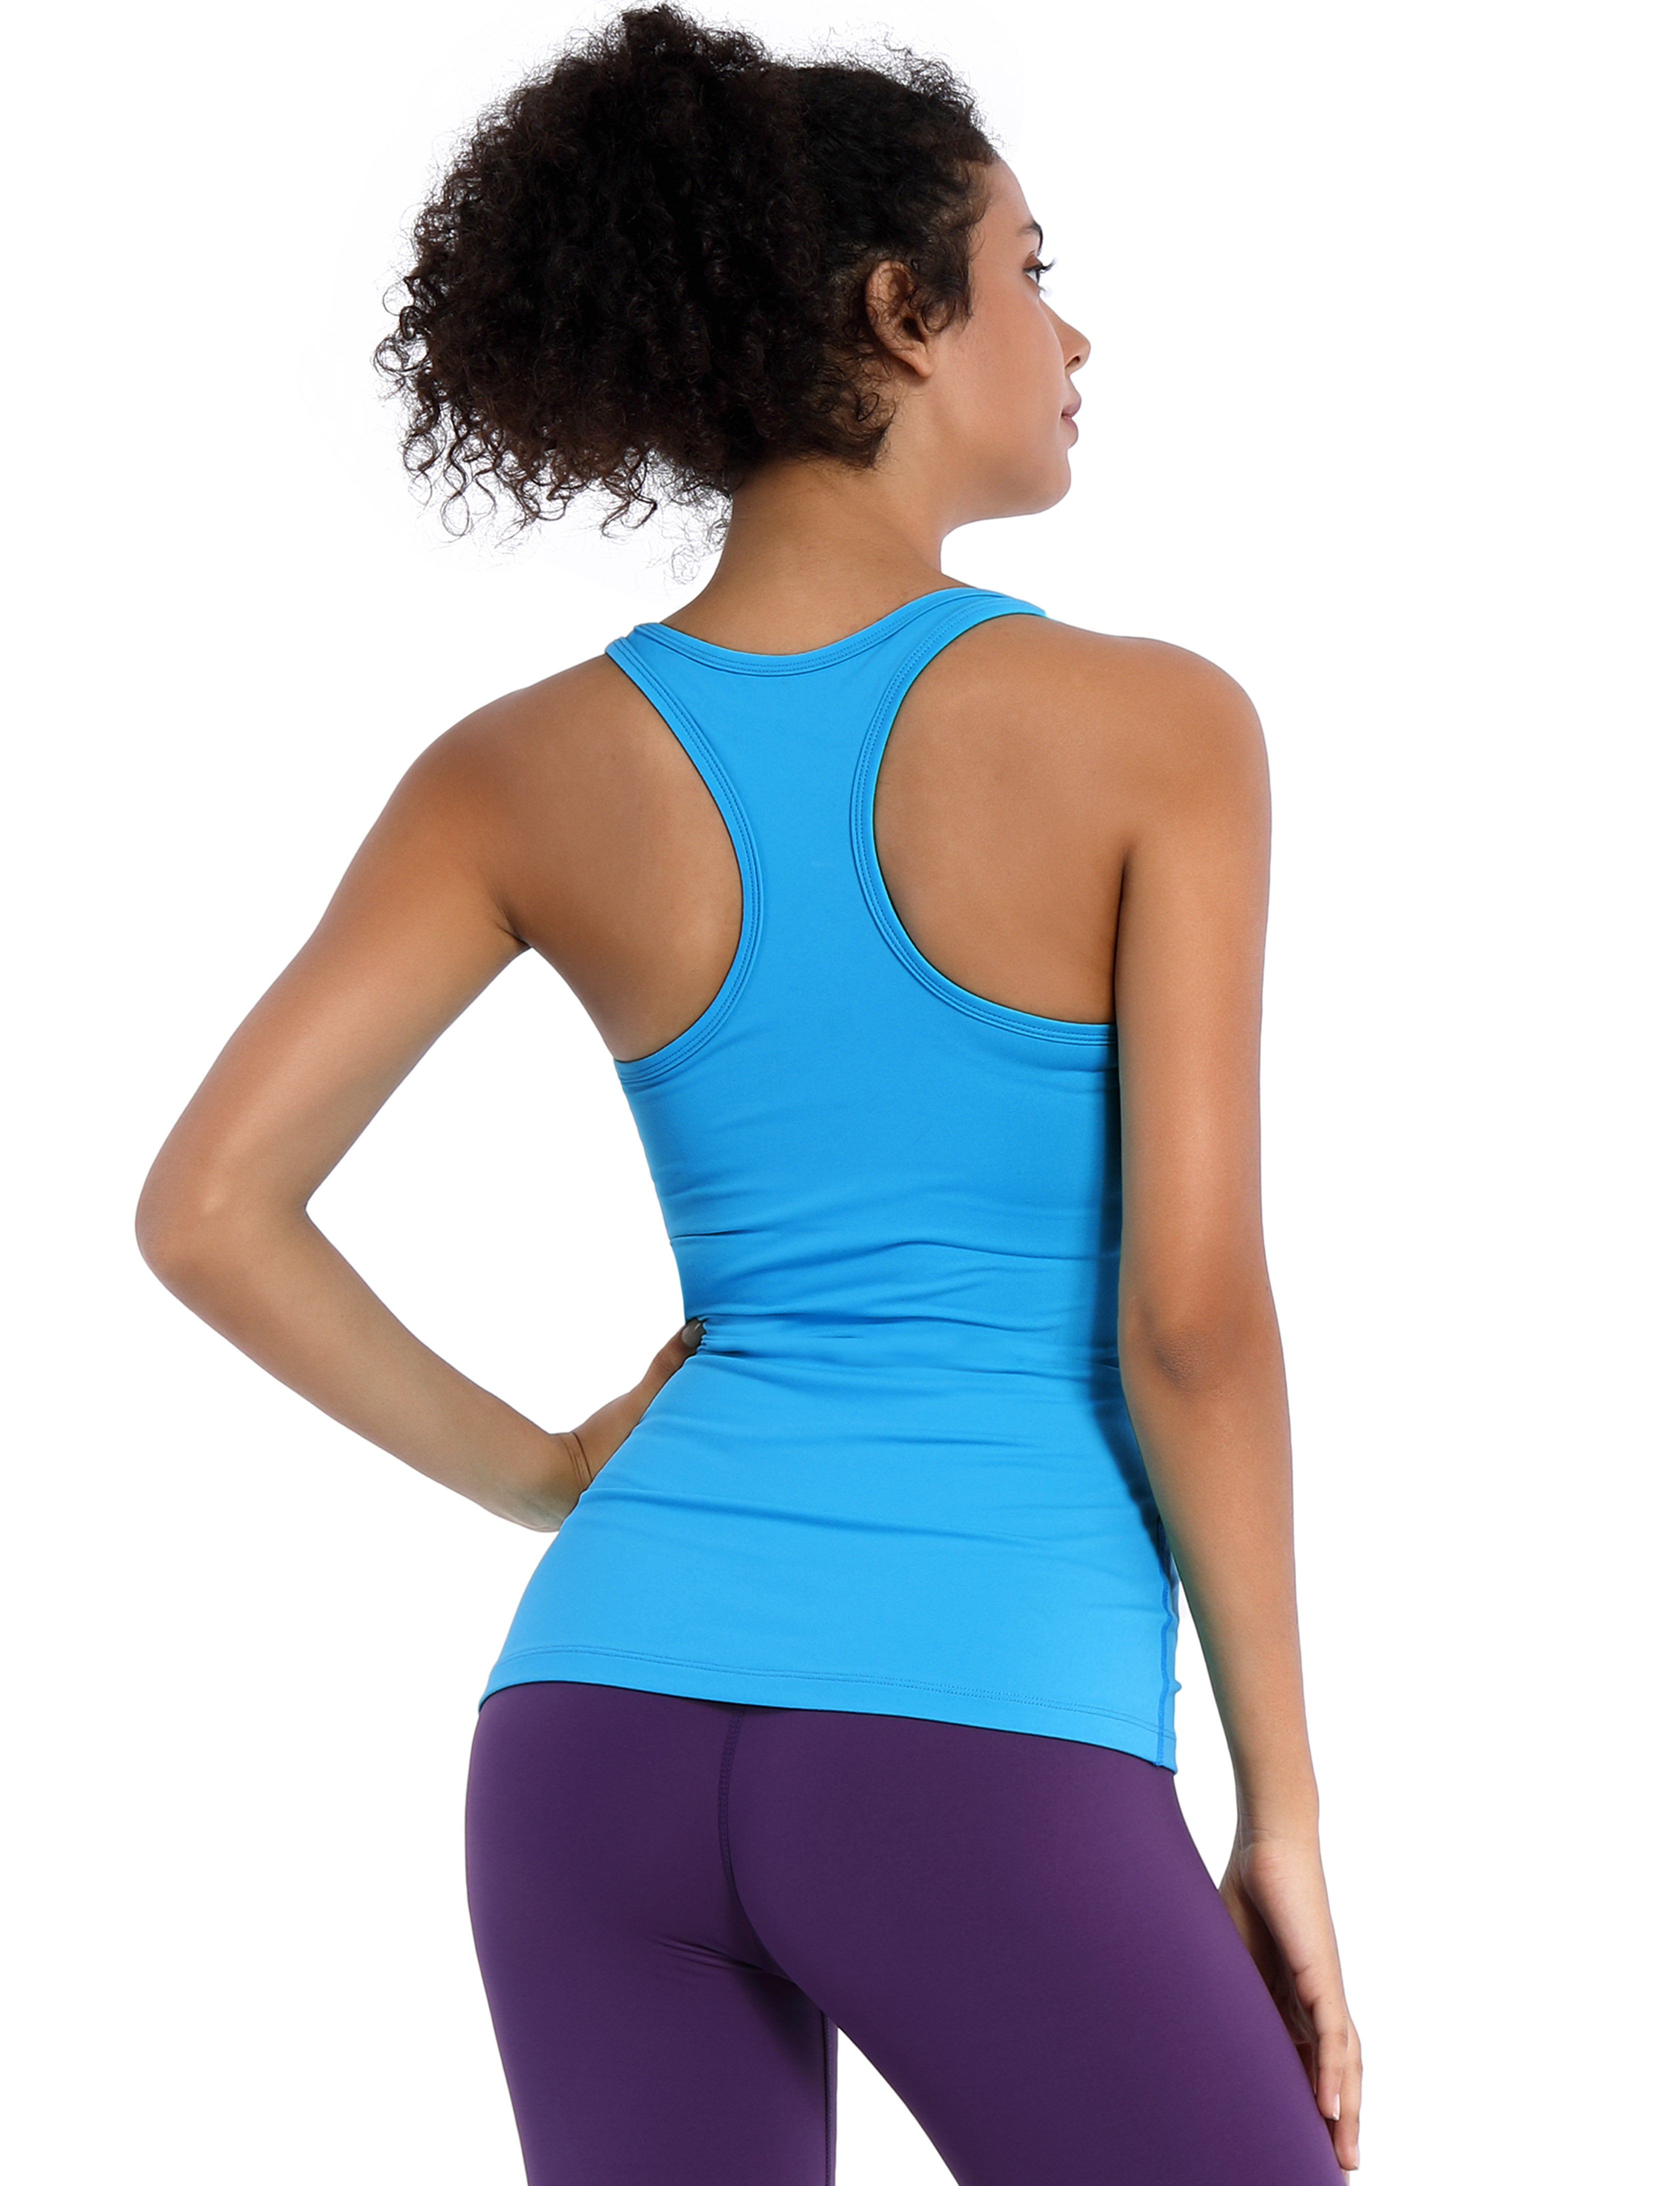 Racerback Athletic Tank Tops electricblue 92%Nylon/8%Spandex(Cotton Soft) Designed for Yoga Tight Fit So buttery soft, it feels weightless Sweat-wicking Four-way stretch Breathable Contours your body Sits below the waistband for moderate, everyday coverage